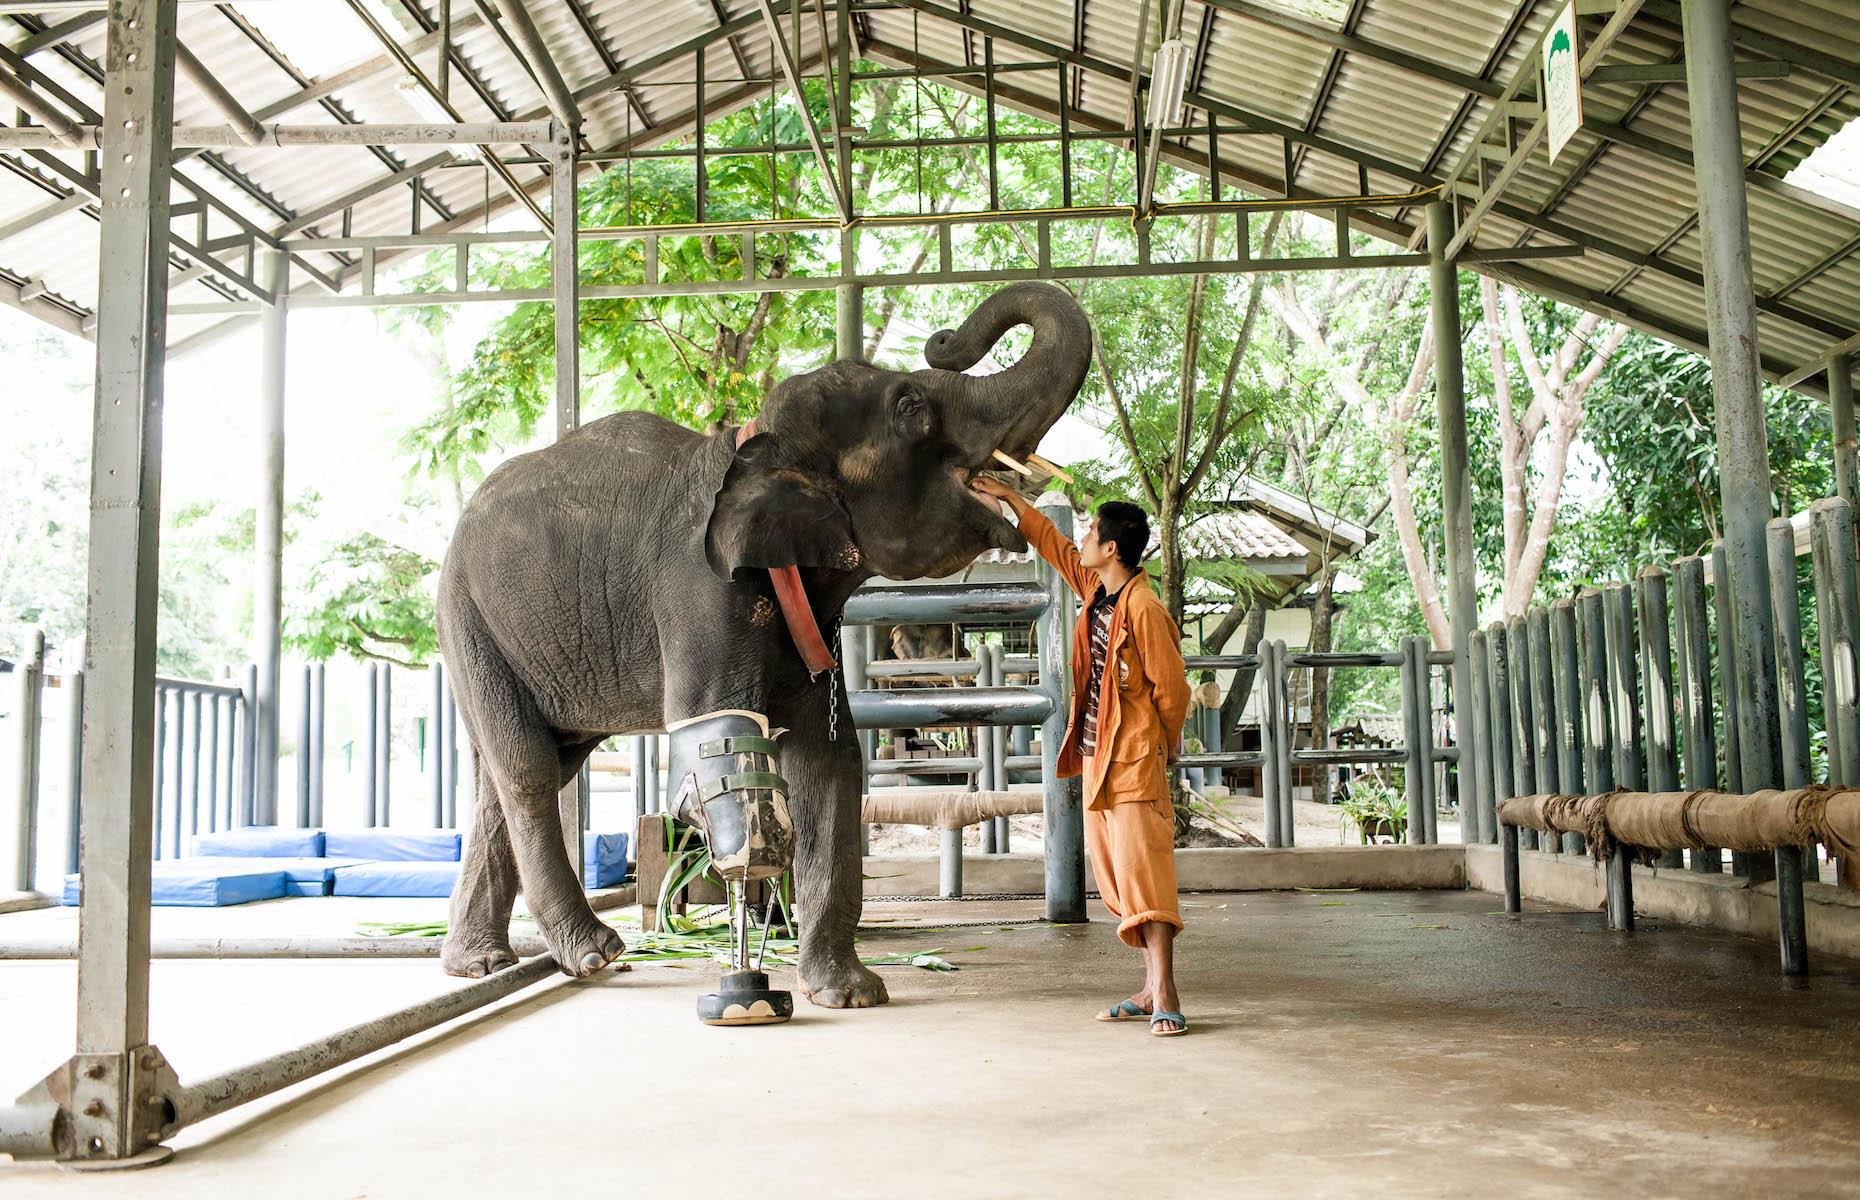 <p>Meet Mosha, the first elephant to receive a prosthetic leg, at the Friends of the Asian Elephant Hospital near Chiang Mai. Sadly, Mosha stepped on a landmine near the Burmese border when just seven months old. As part of this special excursion, arranged for guests by luxury hotel <a href="https://www.theakyra.com/chiang-mai/experience/be-inspired/elephant-day-care-package/">akyra Manor Chiang Mai</a>, children can also design, paint and keep their own model elephant at social enterprise Elephant Parade and meet local artists on a tour of the studio.</p>